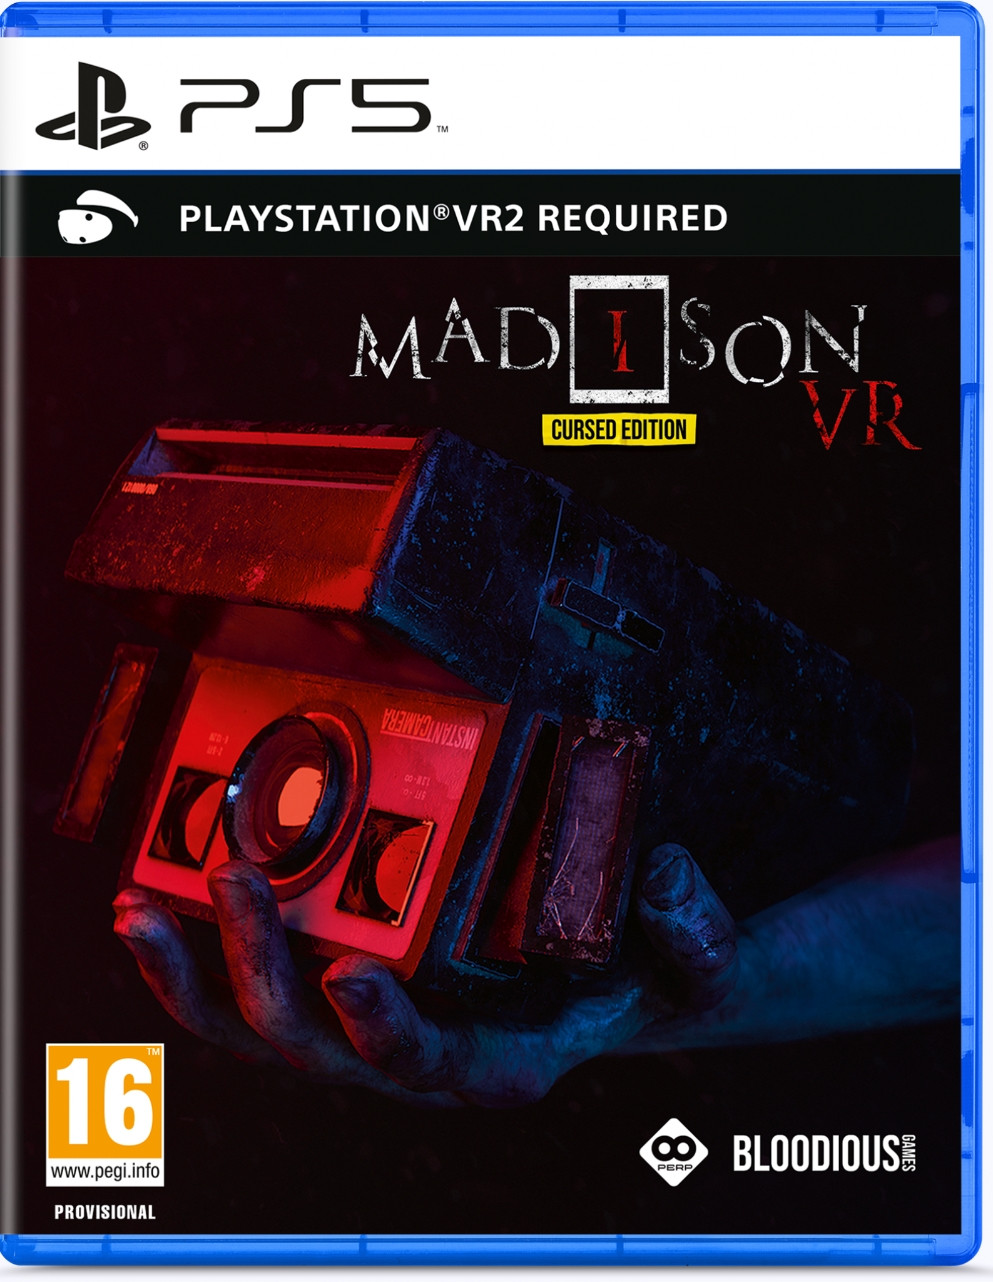 Madison VR - Cursed Edition (PSVR2) (PS5), Bloodious Games